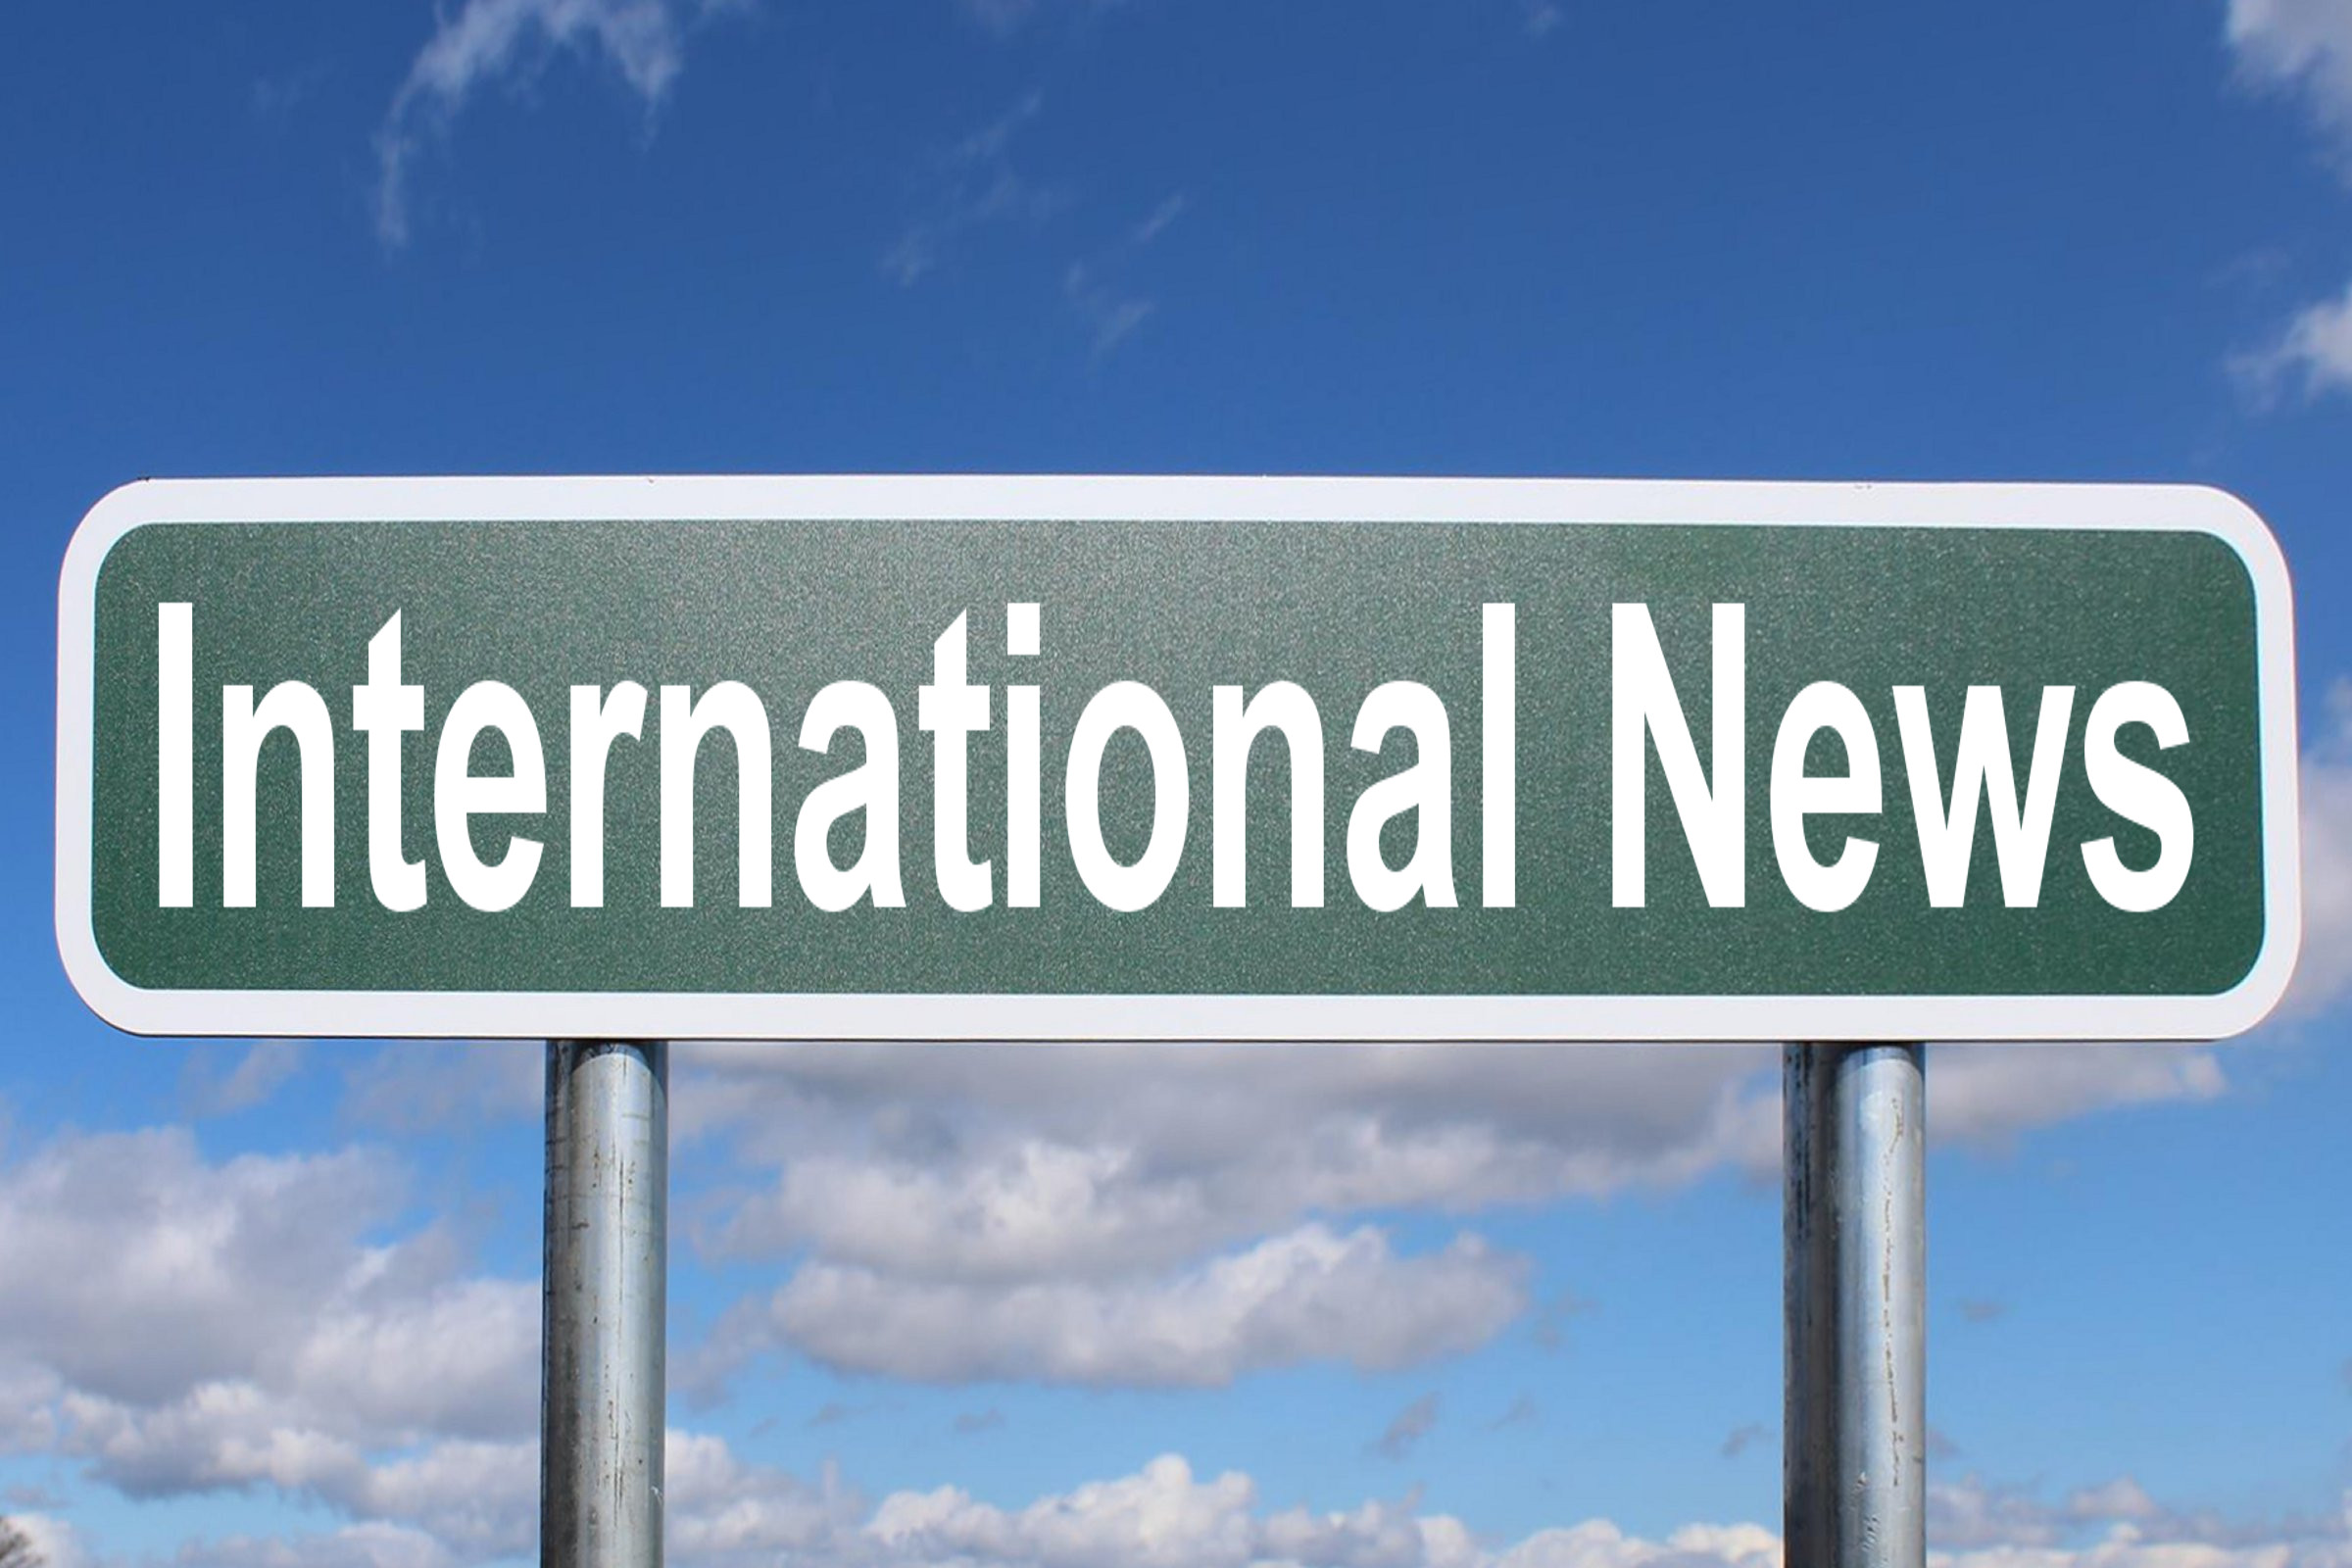 International News Free of Charge Creative Commons Highway sign image